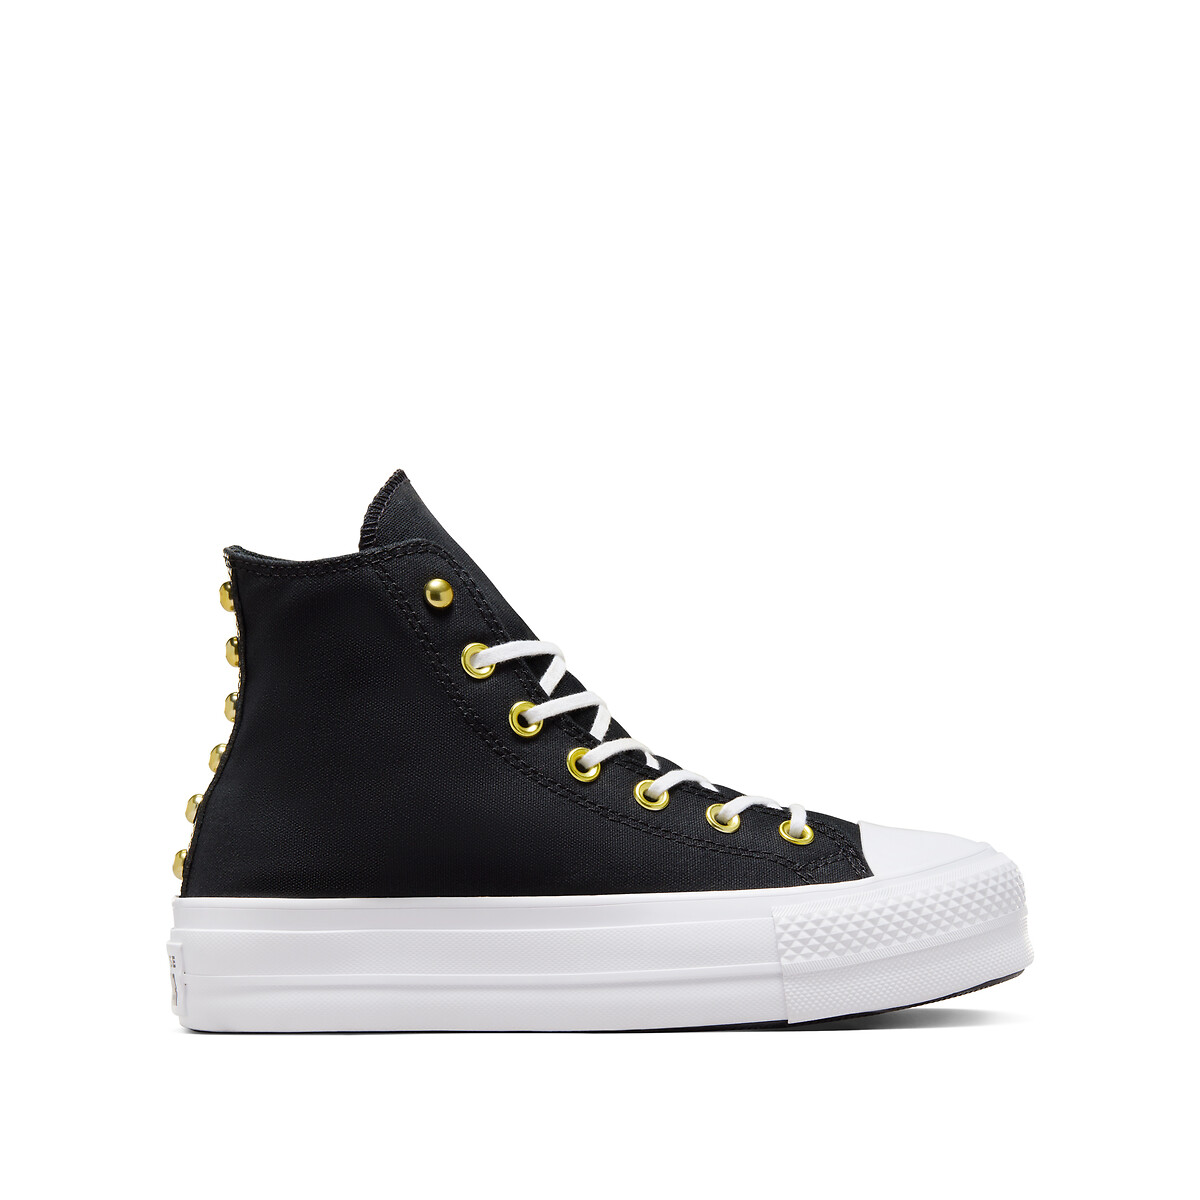 Sneakers All Star Lift Hi Star Studded von Converse